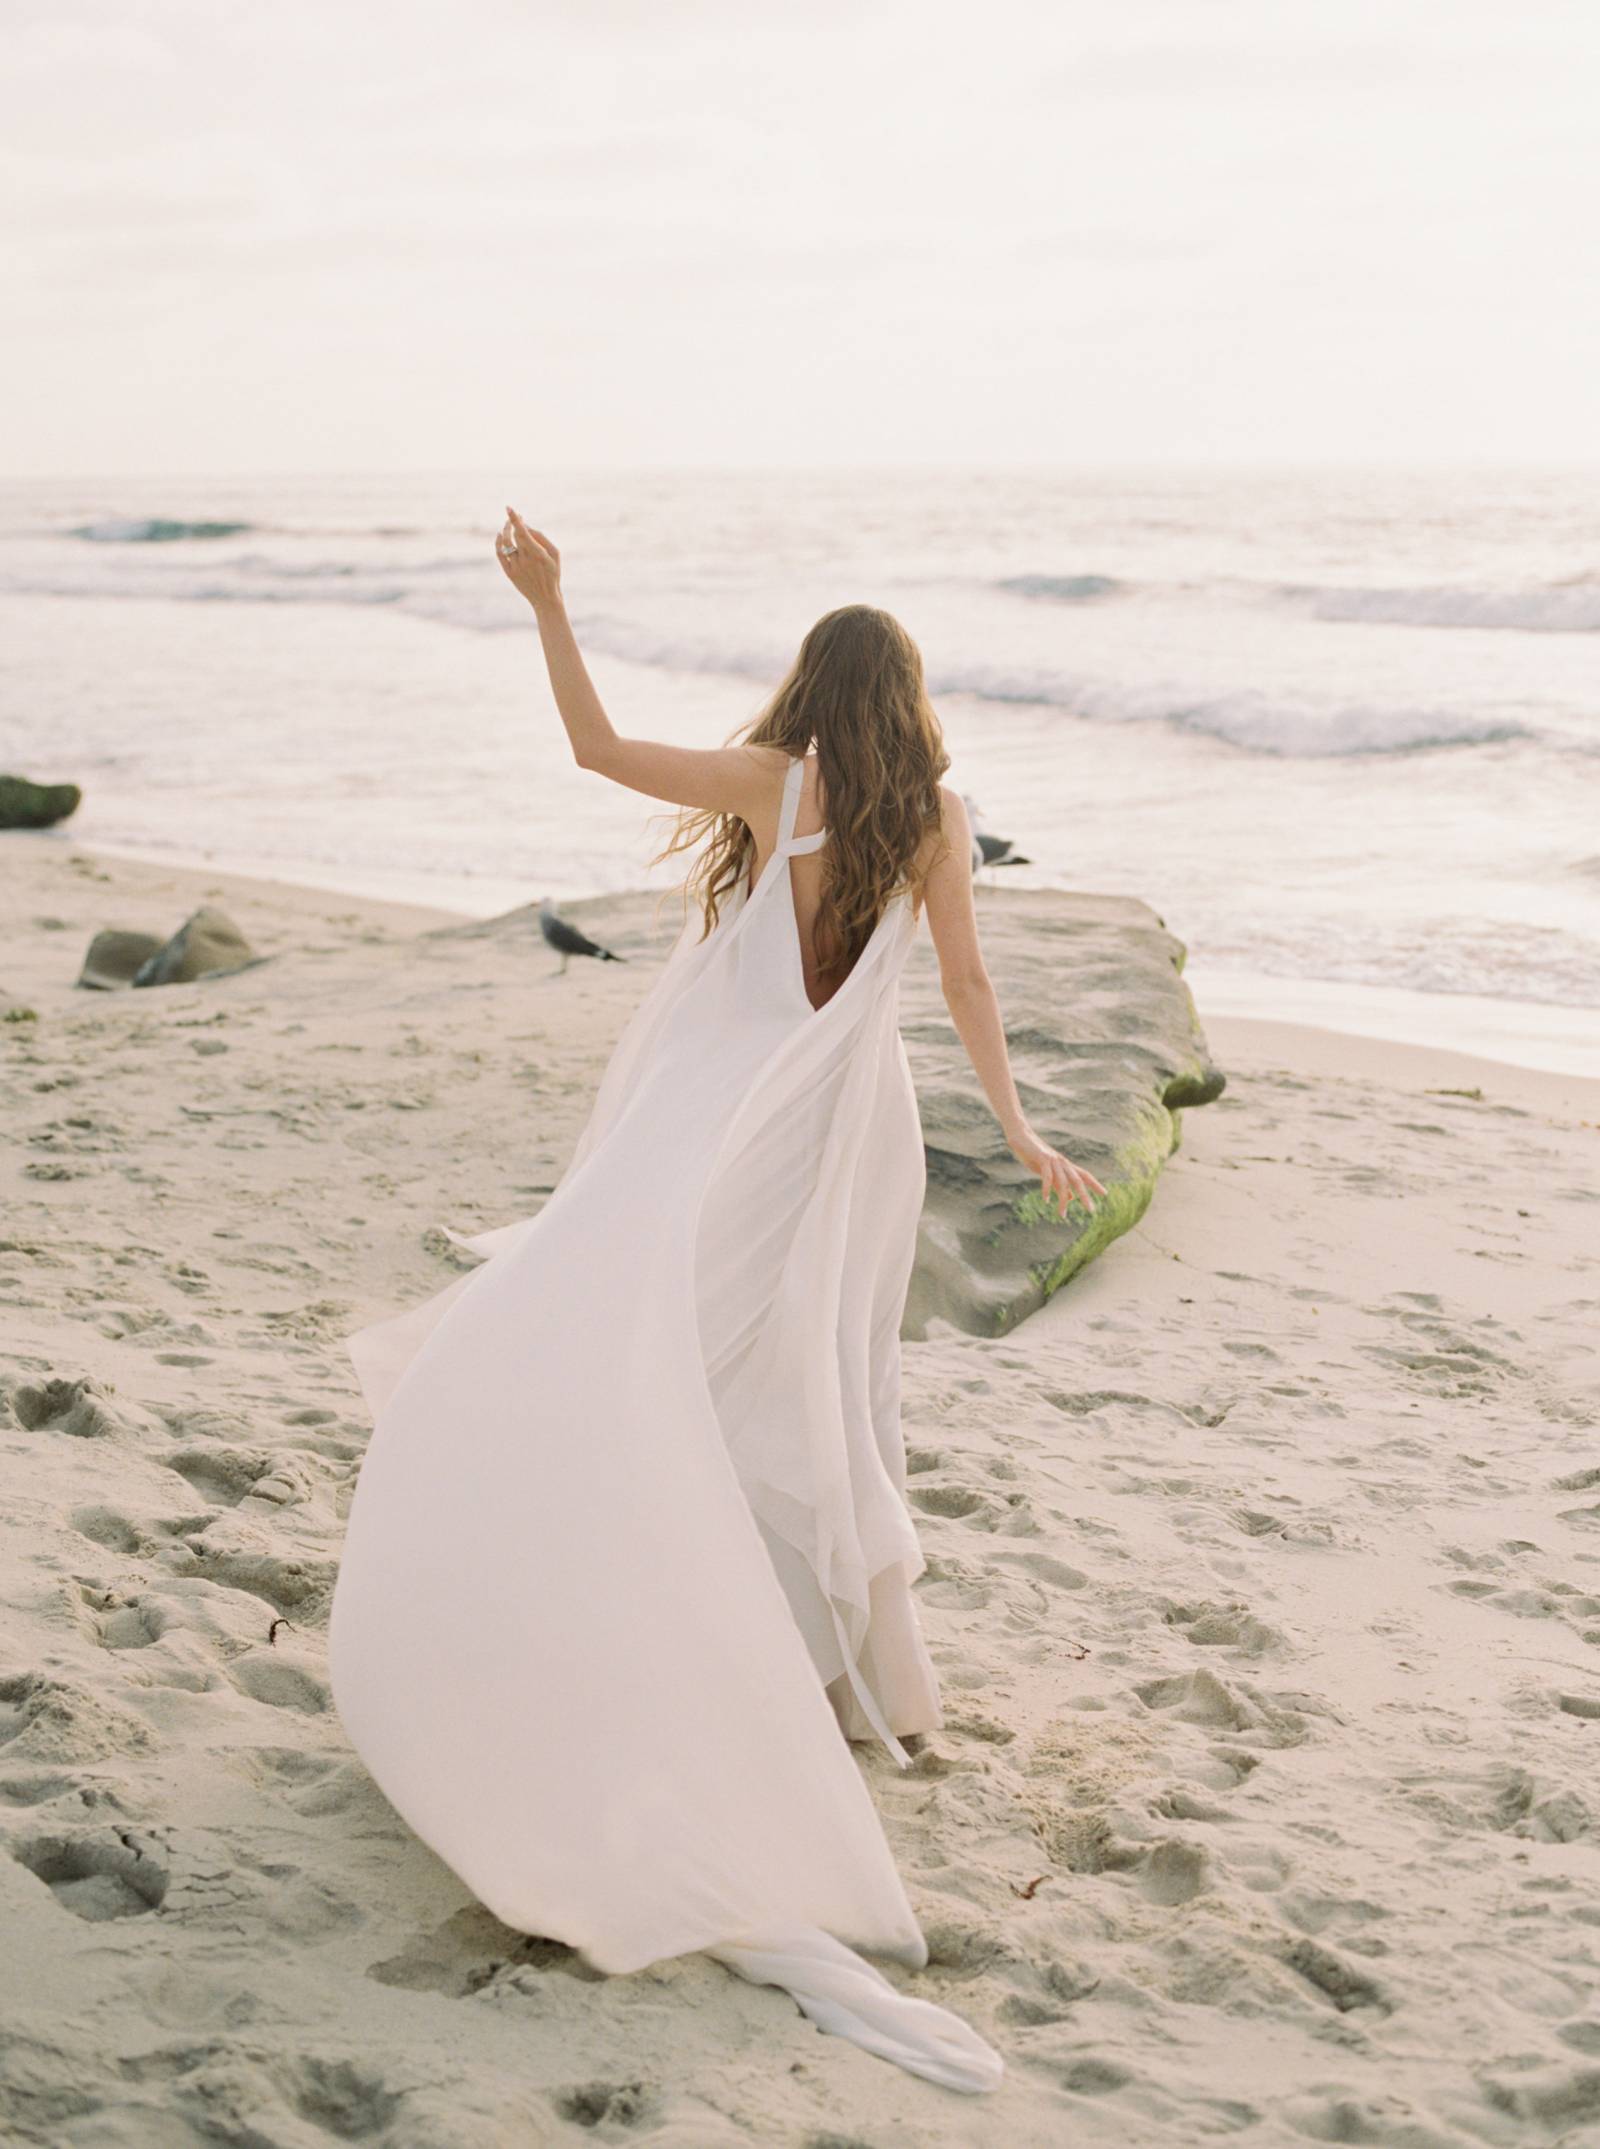 Dreamy Coastal Wedding Inspiration from Southern California | Southern ...